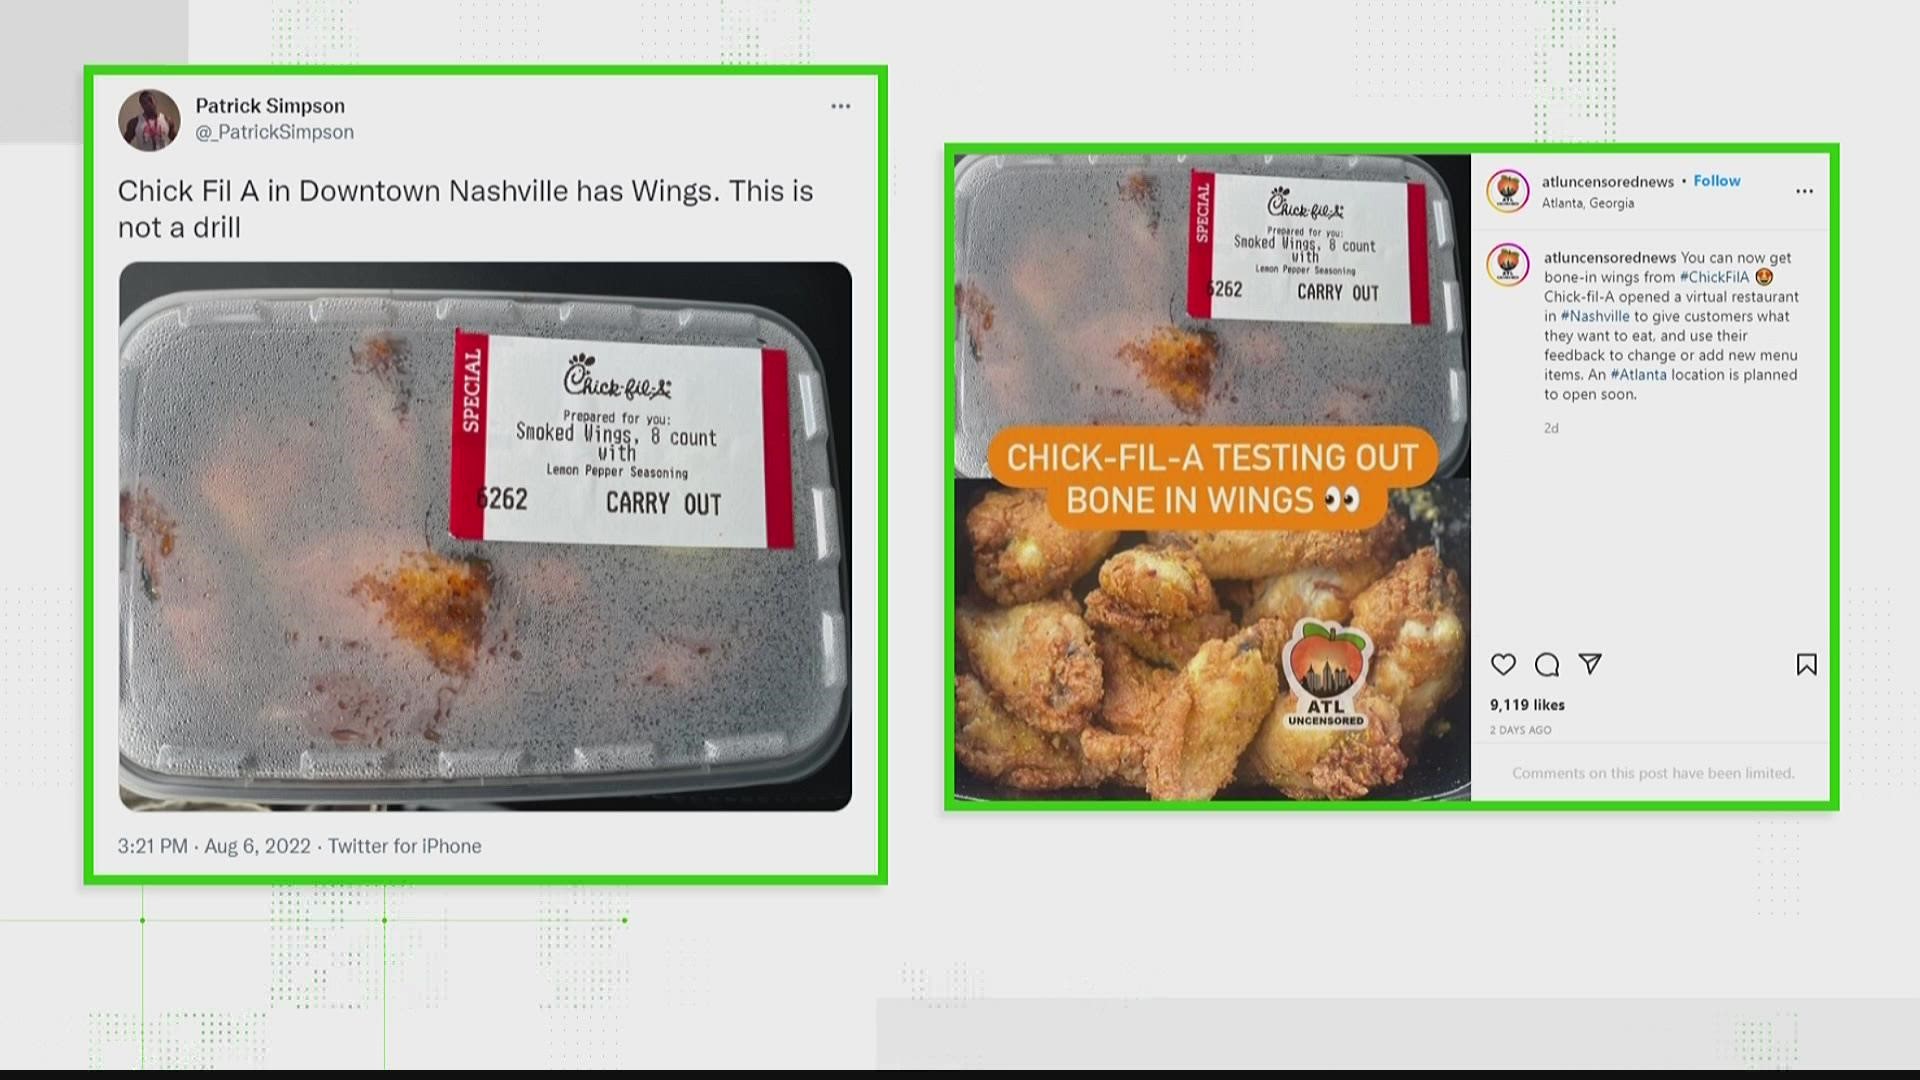 Chick-fil-A is not testing chicken wings and you can not order them at traditional restaurants. Here's what we found.